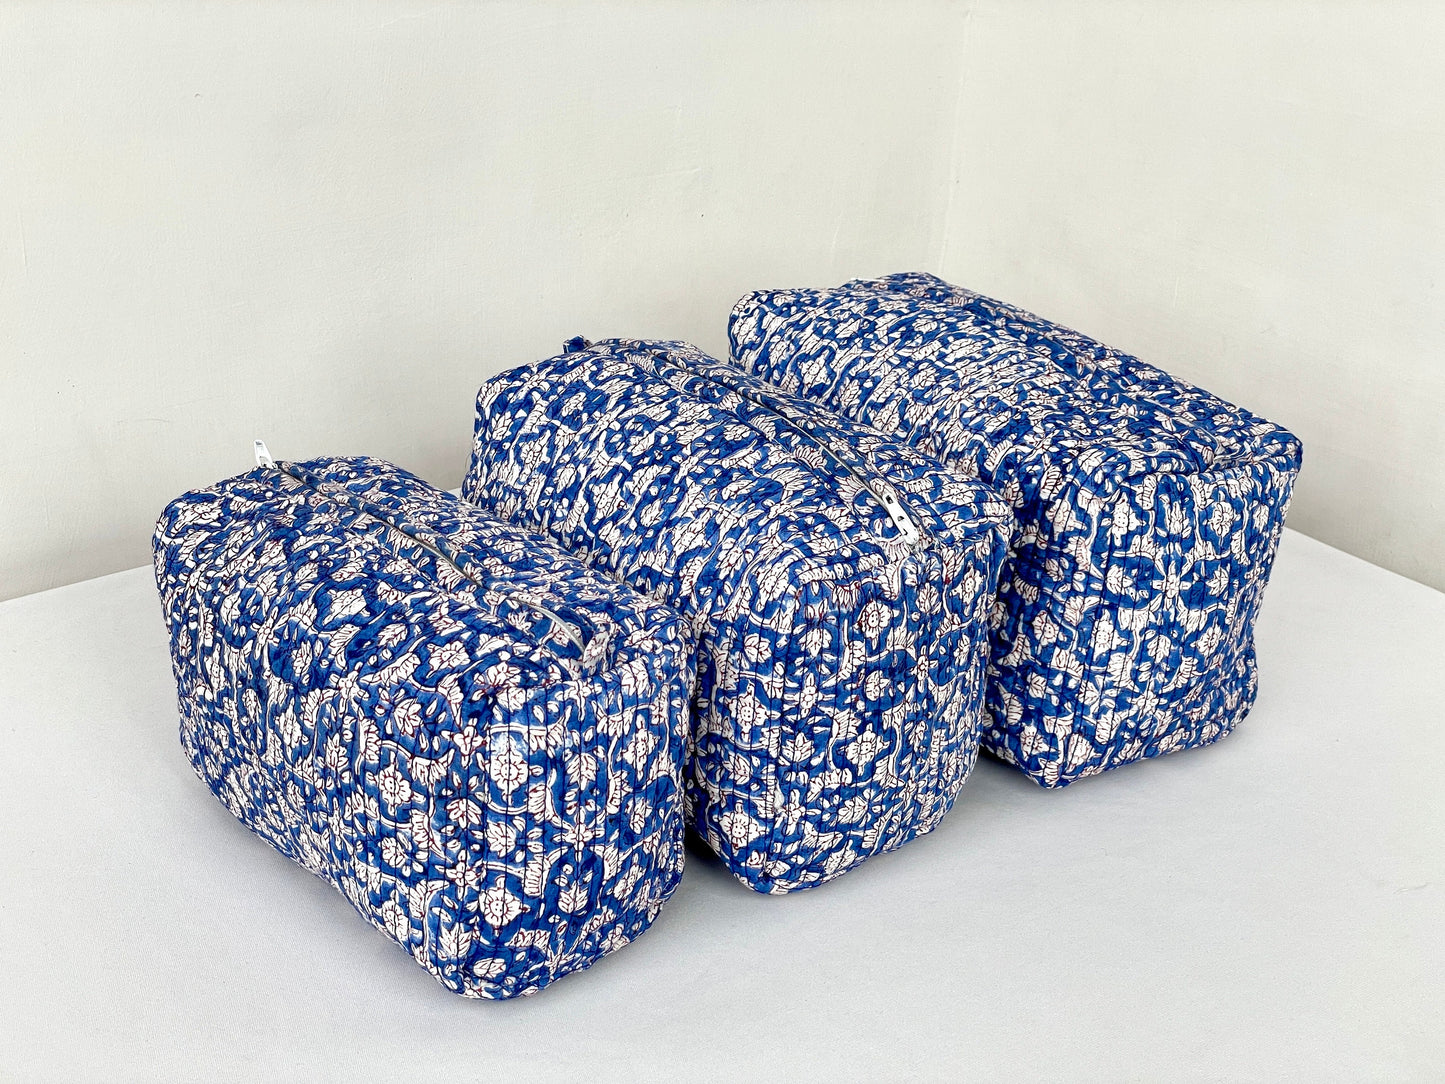 Cotton Quilted Toiletry Bag, Elegant Floral Hand Block Print Fabric Wash Bag, Pack of 3 Blue & White Makeup Bag, Gift for She, Her